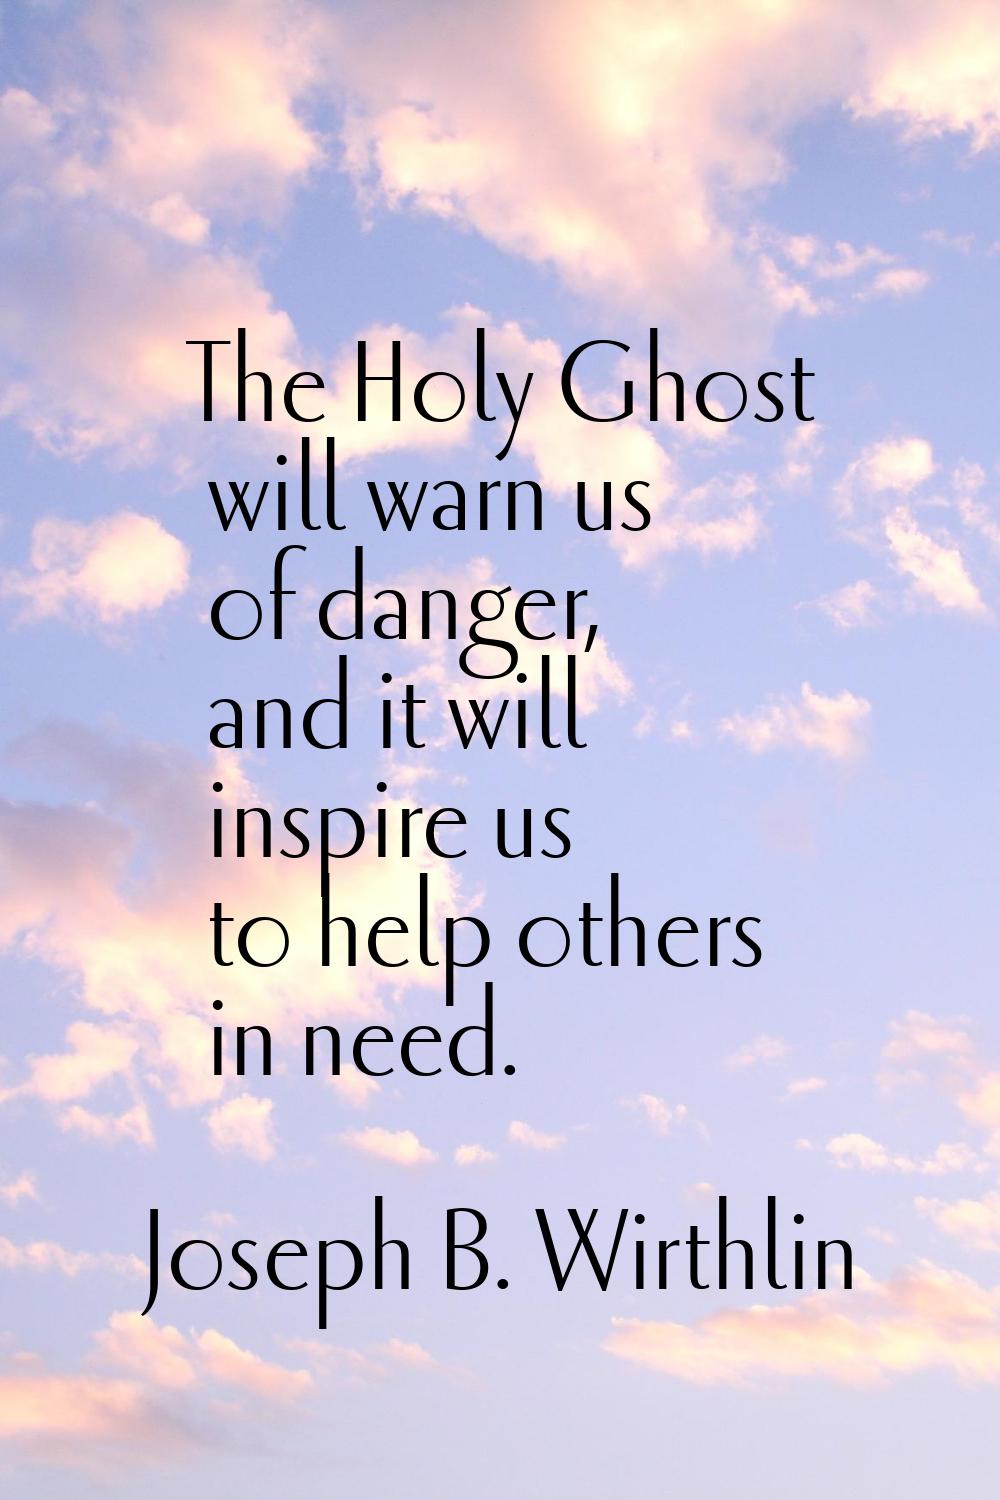 The Holy Ghost will warn us of danger, and it will inspire us to help others in need.